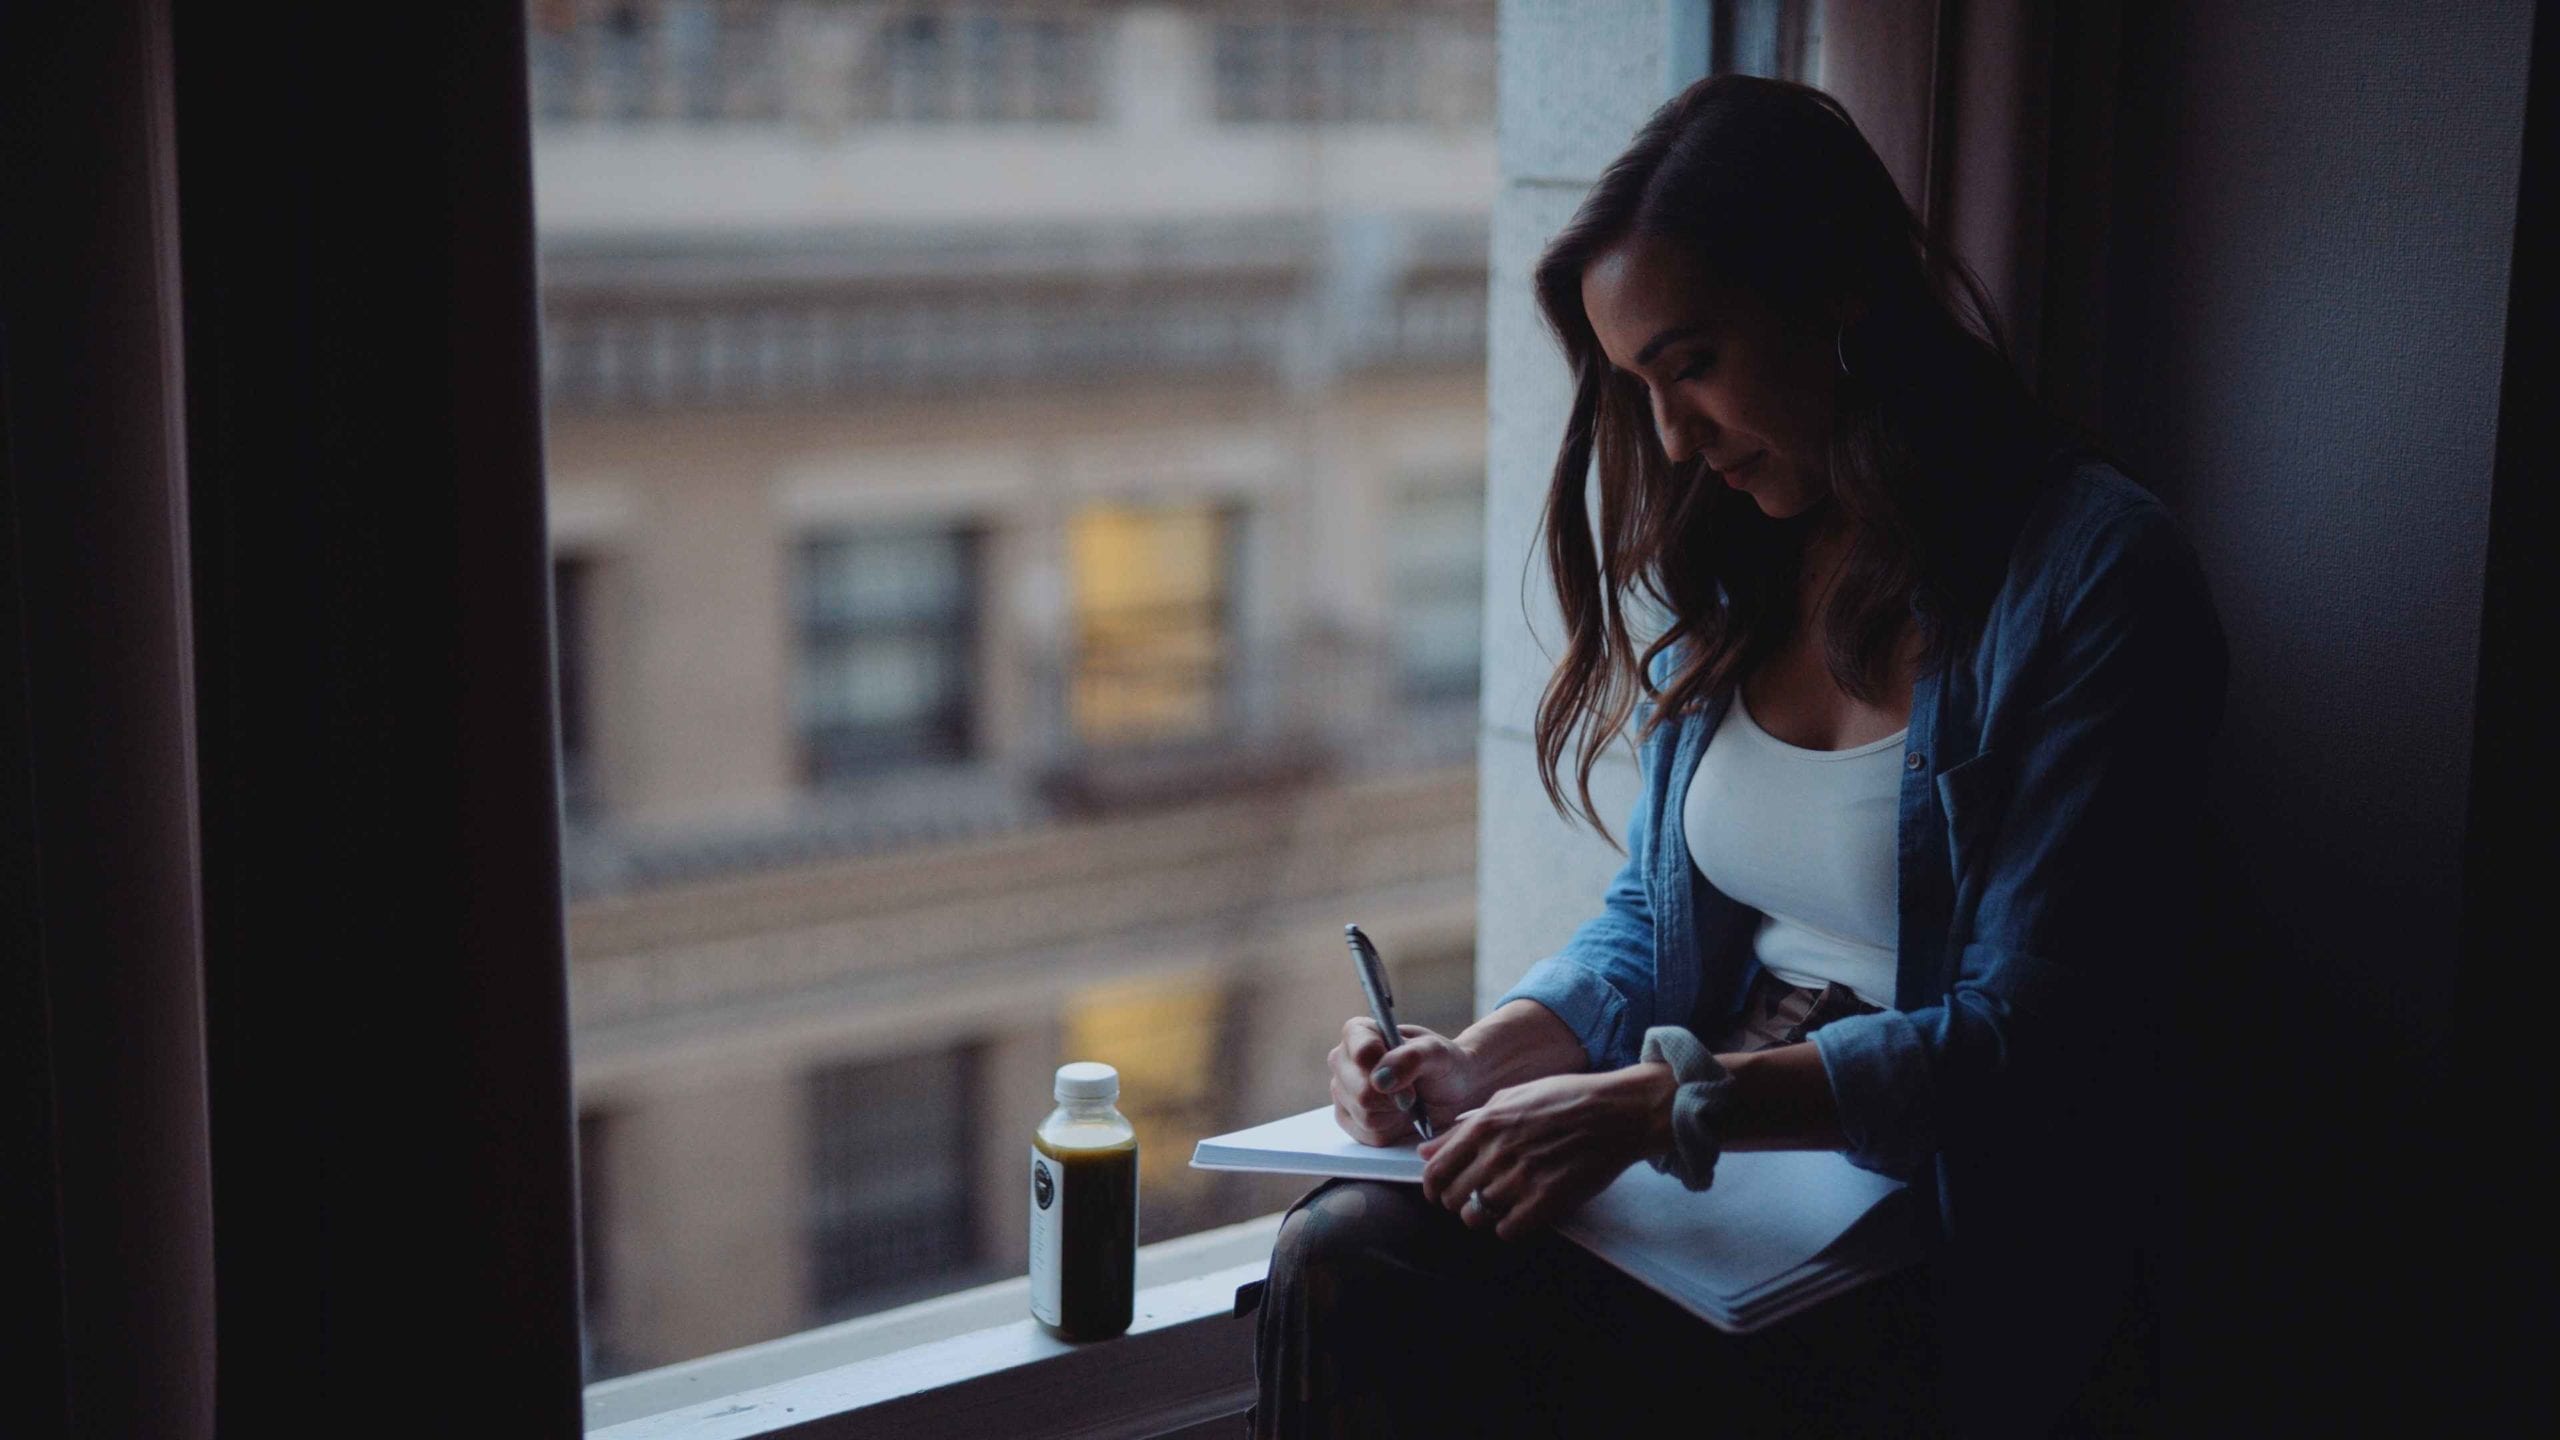 Woman with long hair sitting on a window ledge writing into a notebook